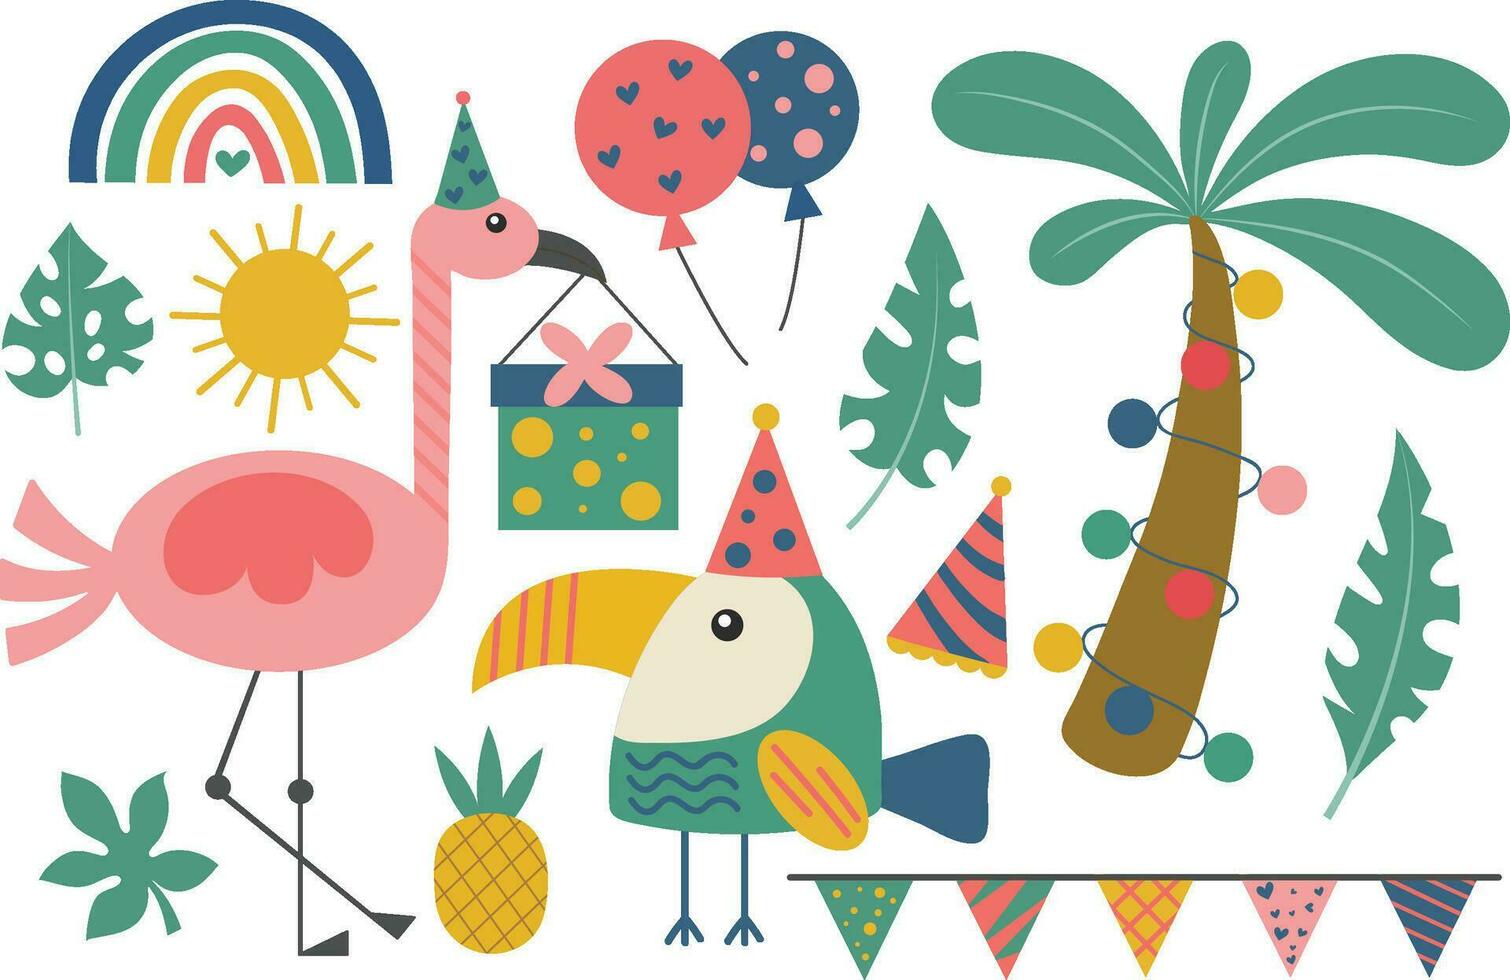 Tropical Party Bliss Birds, Rainbows, Palm Trees, Leafy Hats, Sun, Rainbow Balloons, and More vector